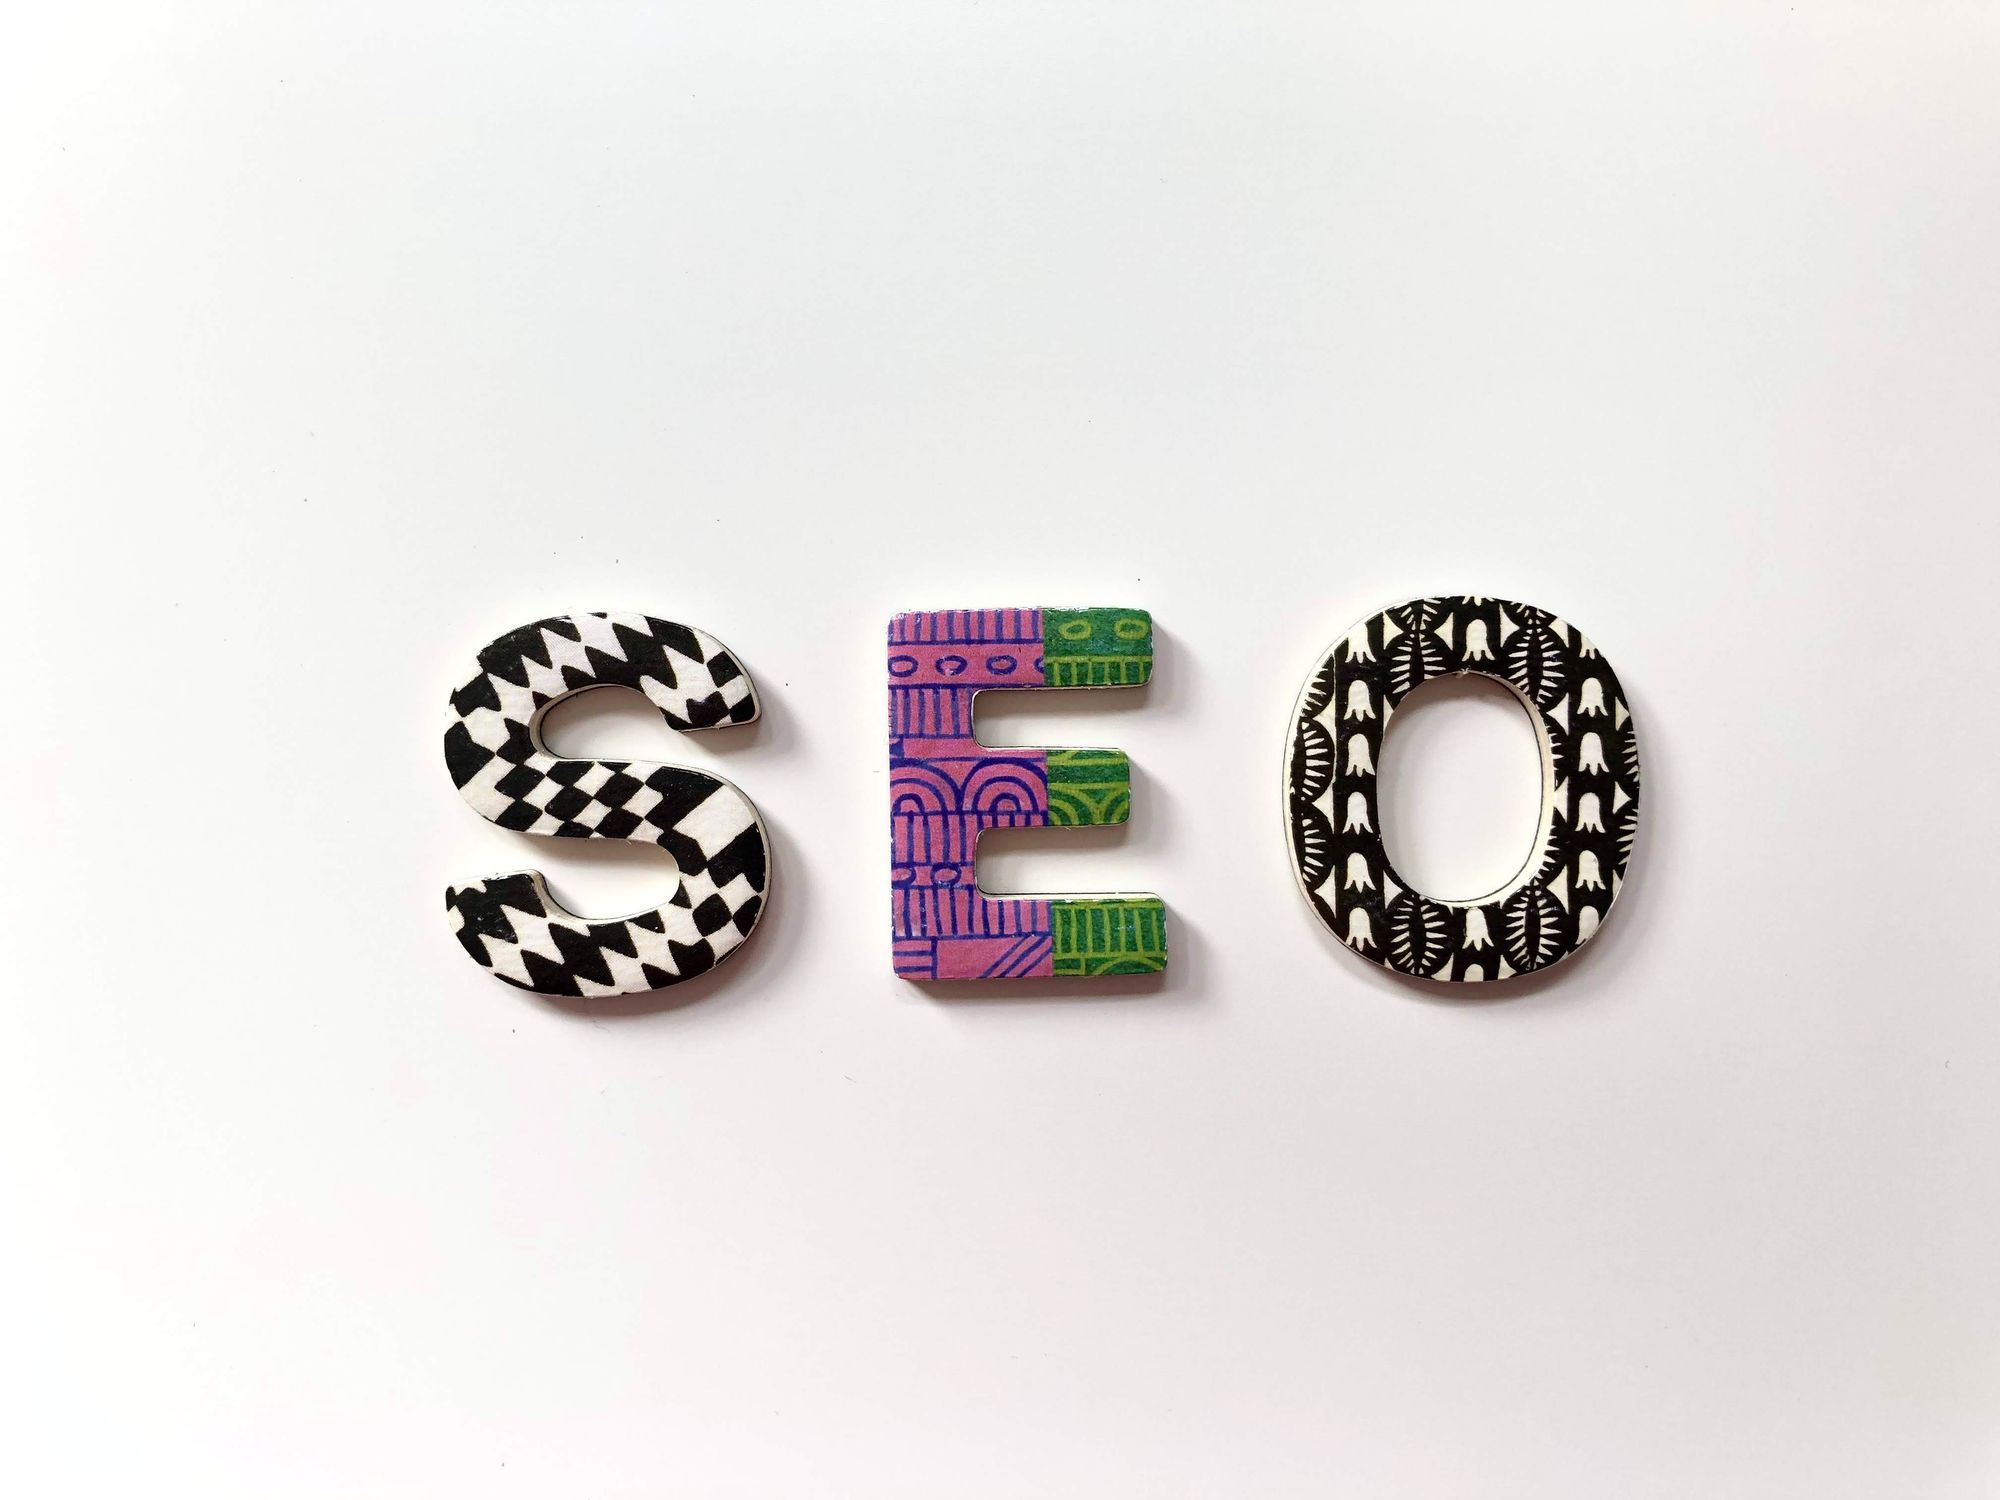 How to do seo in order to grow your business or website in 2023